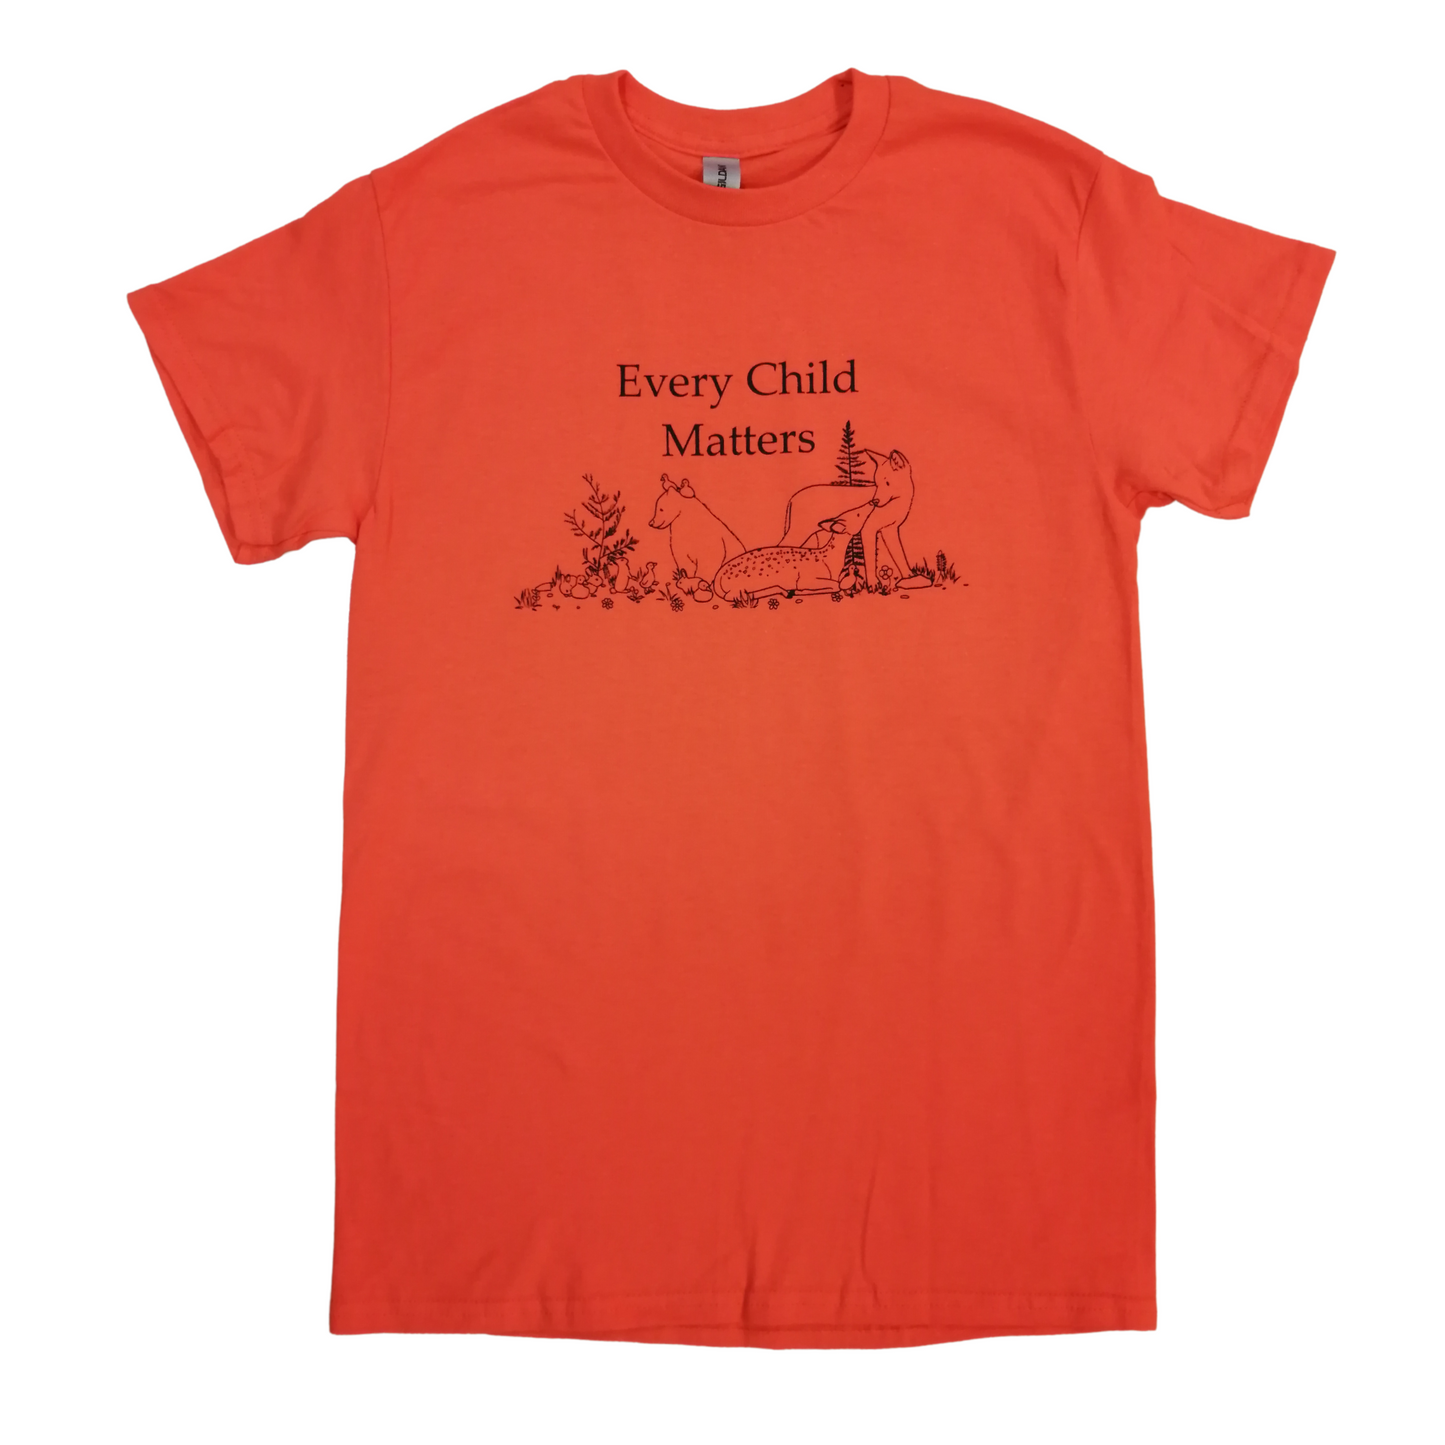 EVERY CHILD MATTERS ADULT T